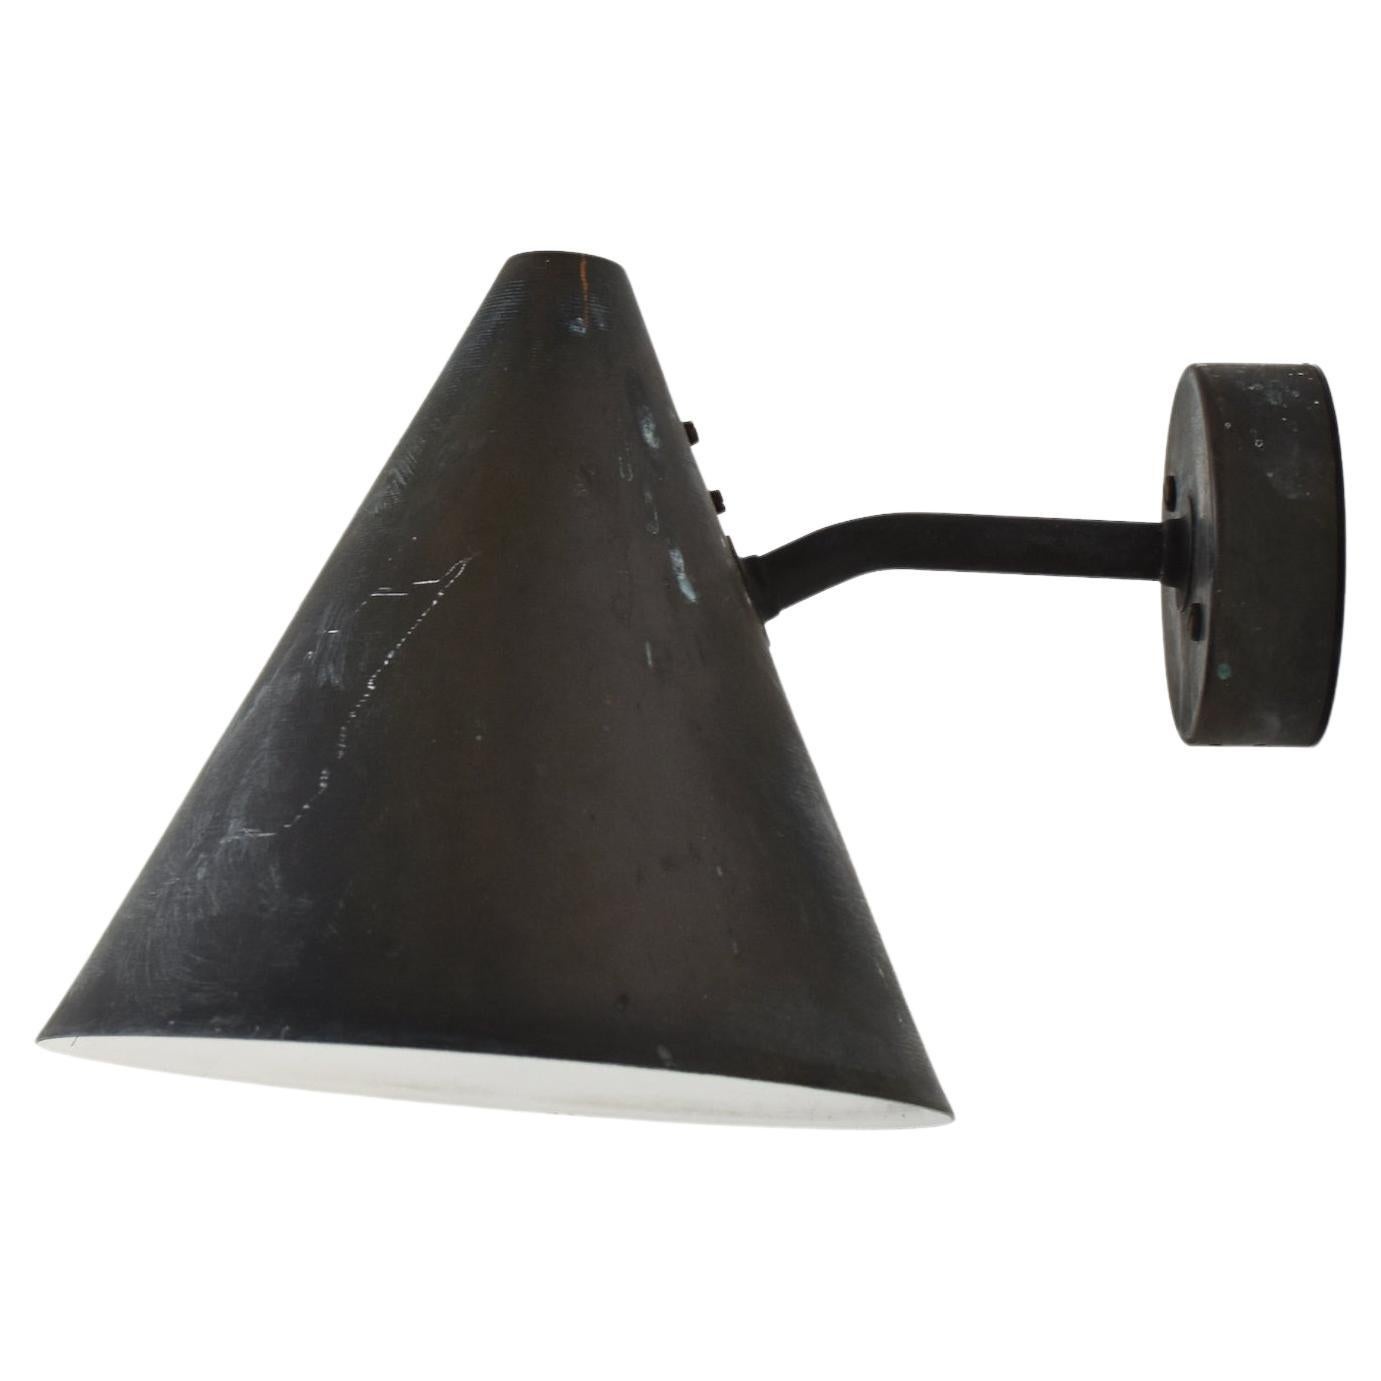 'Tratten' Wall Lamp by Hans Agne Jakobsson for AB Markaryd, Sweden, 1950s For Sale